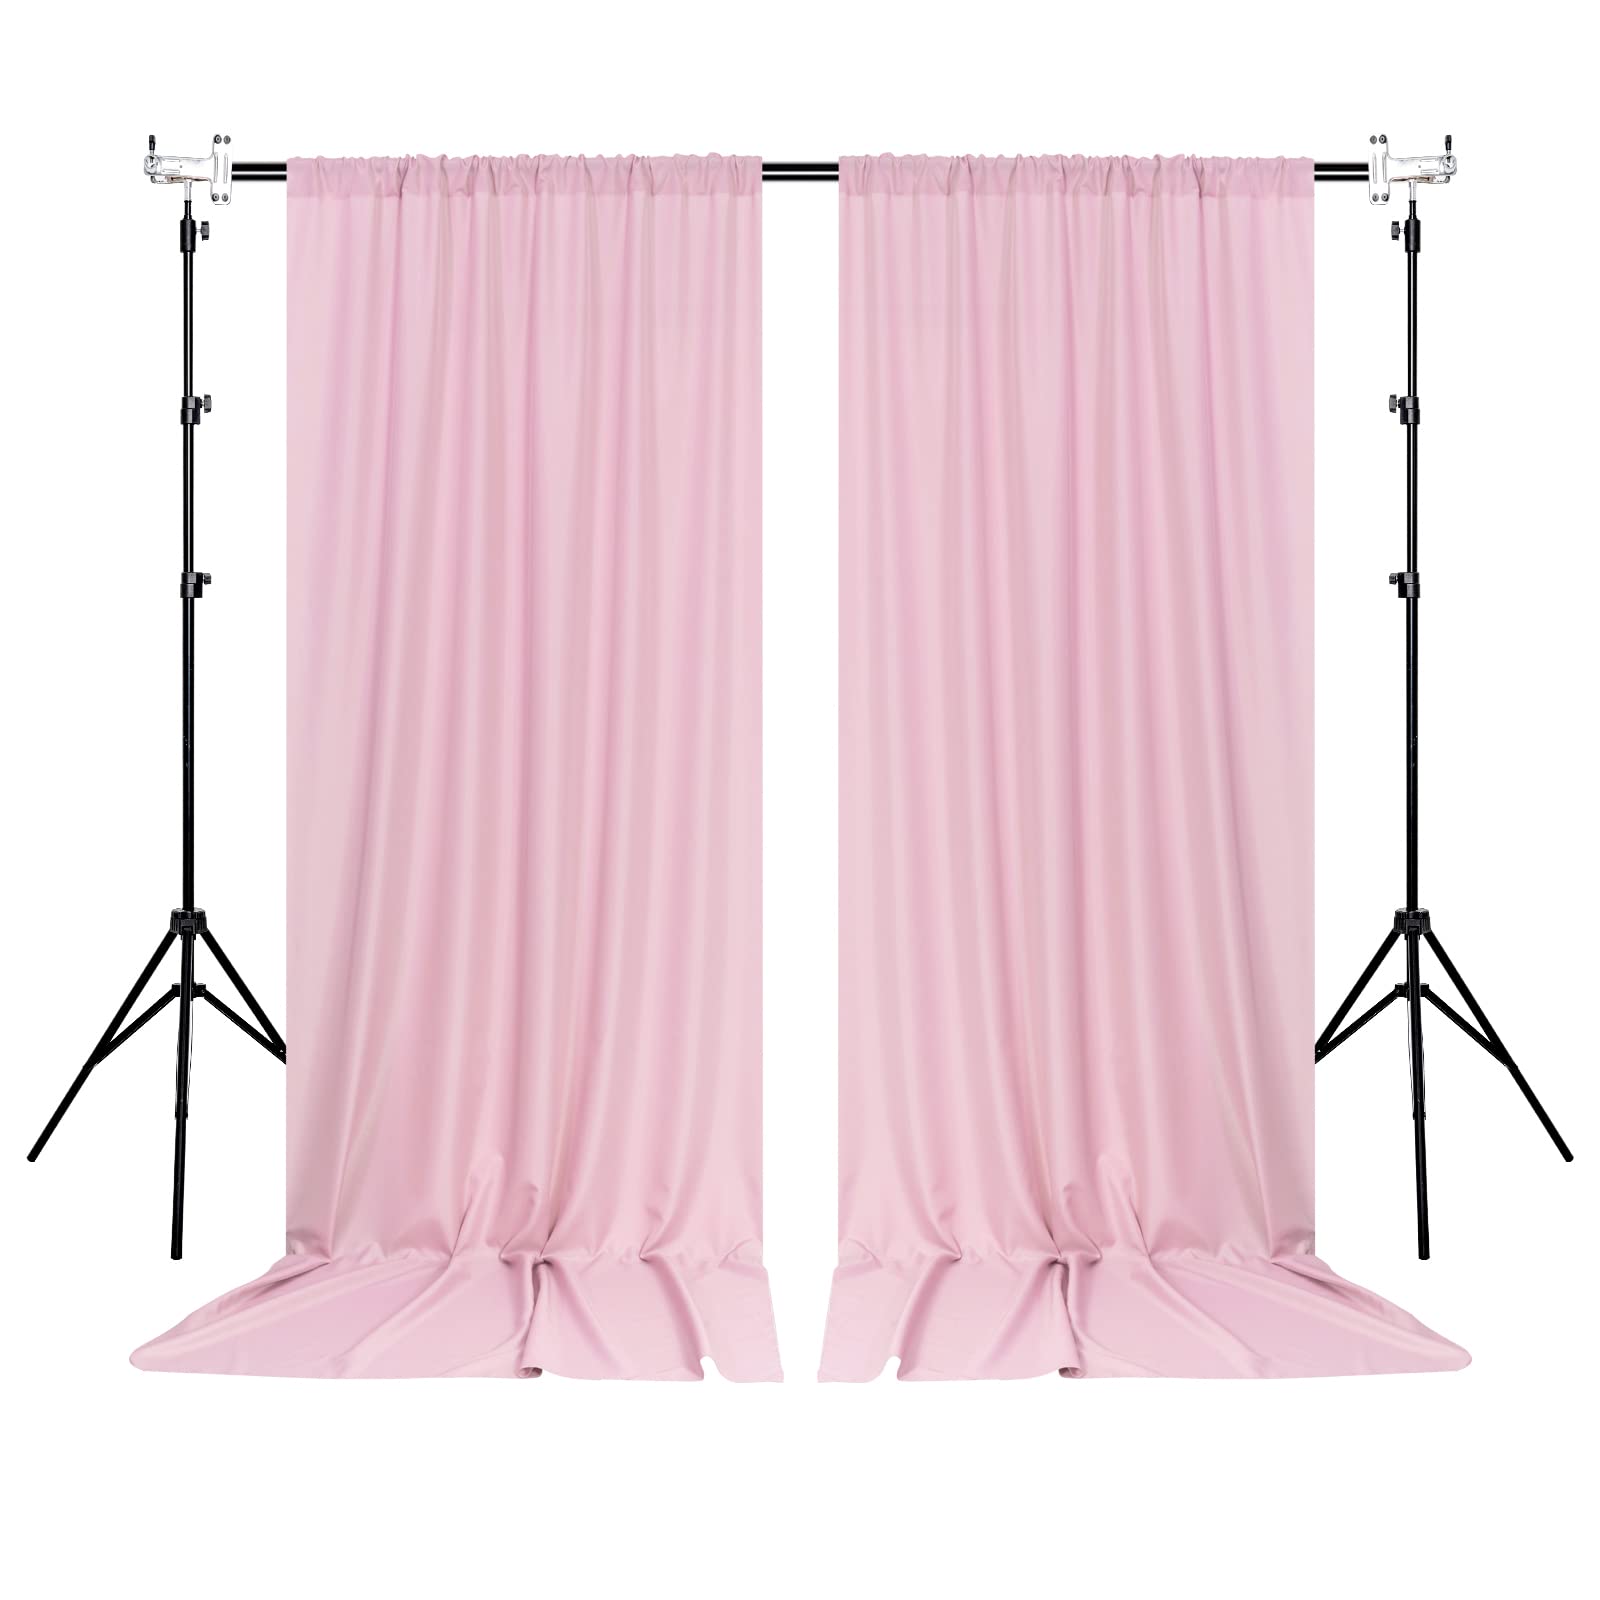 Pink Backdrop Curtain for Parties Rod Pocket Pink Curtains Photography Backdrop Drapes Privacy Fabric Decoration for Birthday Party Wedding Baby Shower Home Decor, 5ft x 10ft, 2 Panels